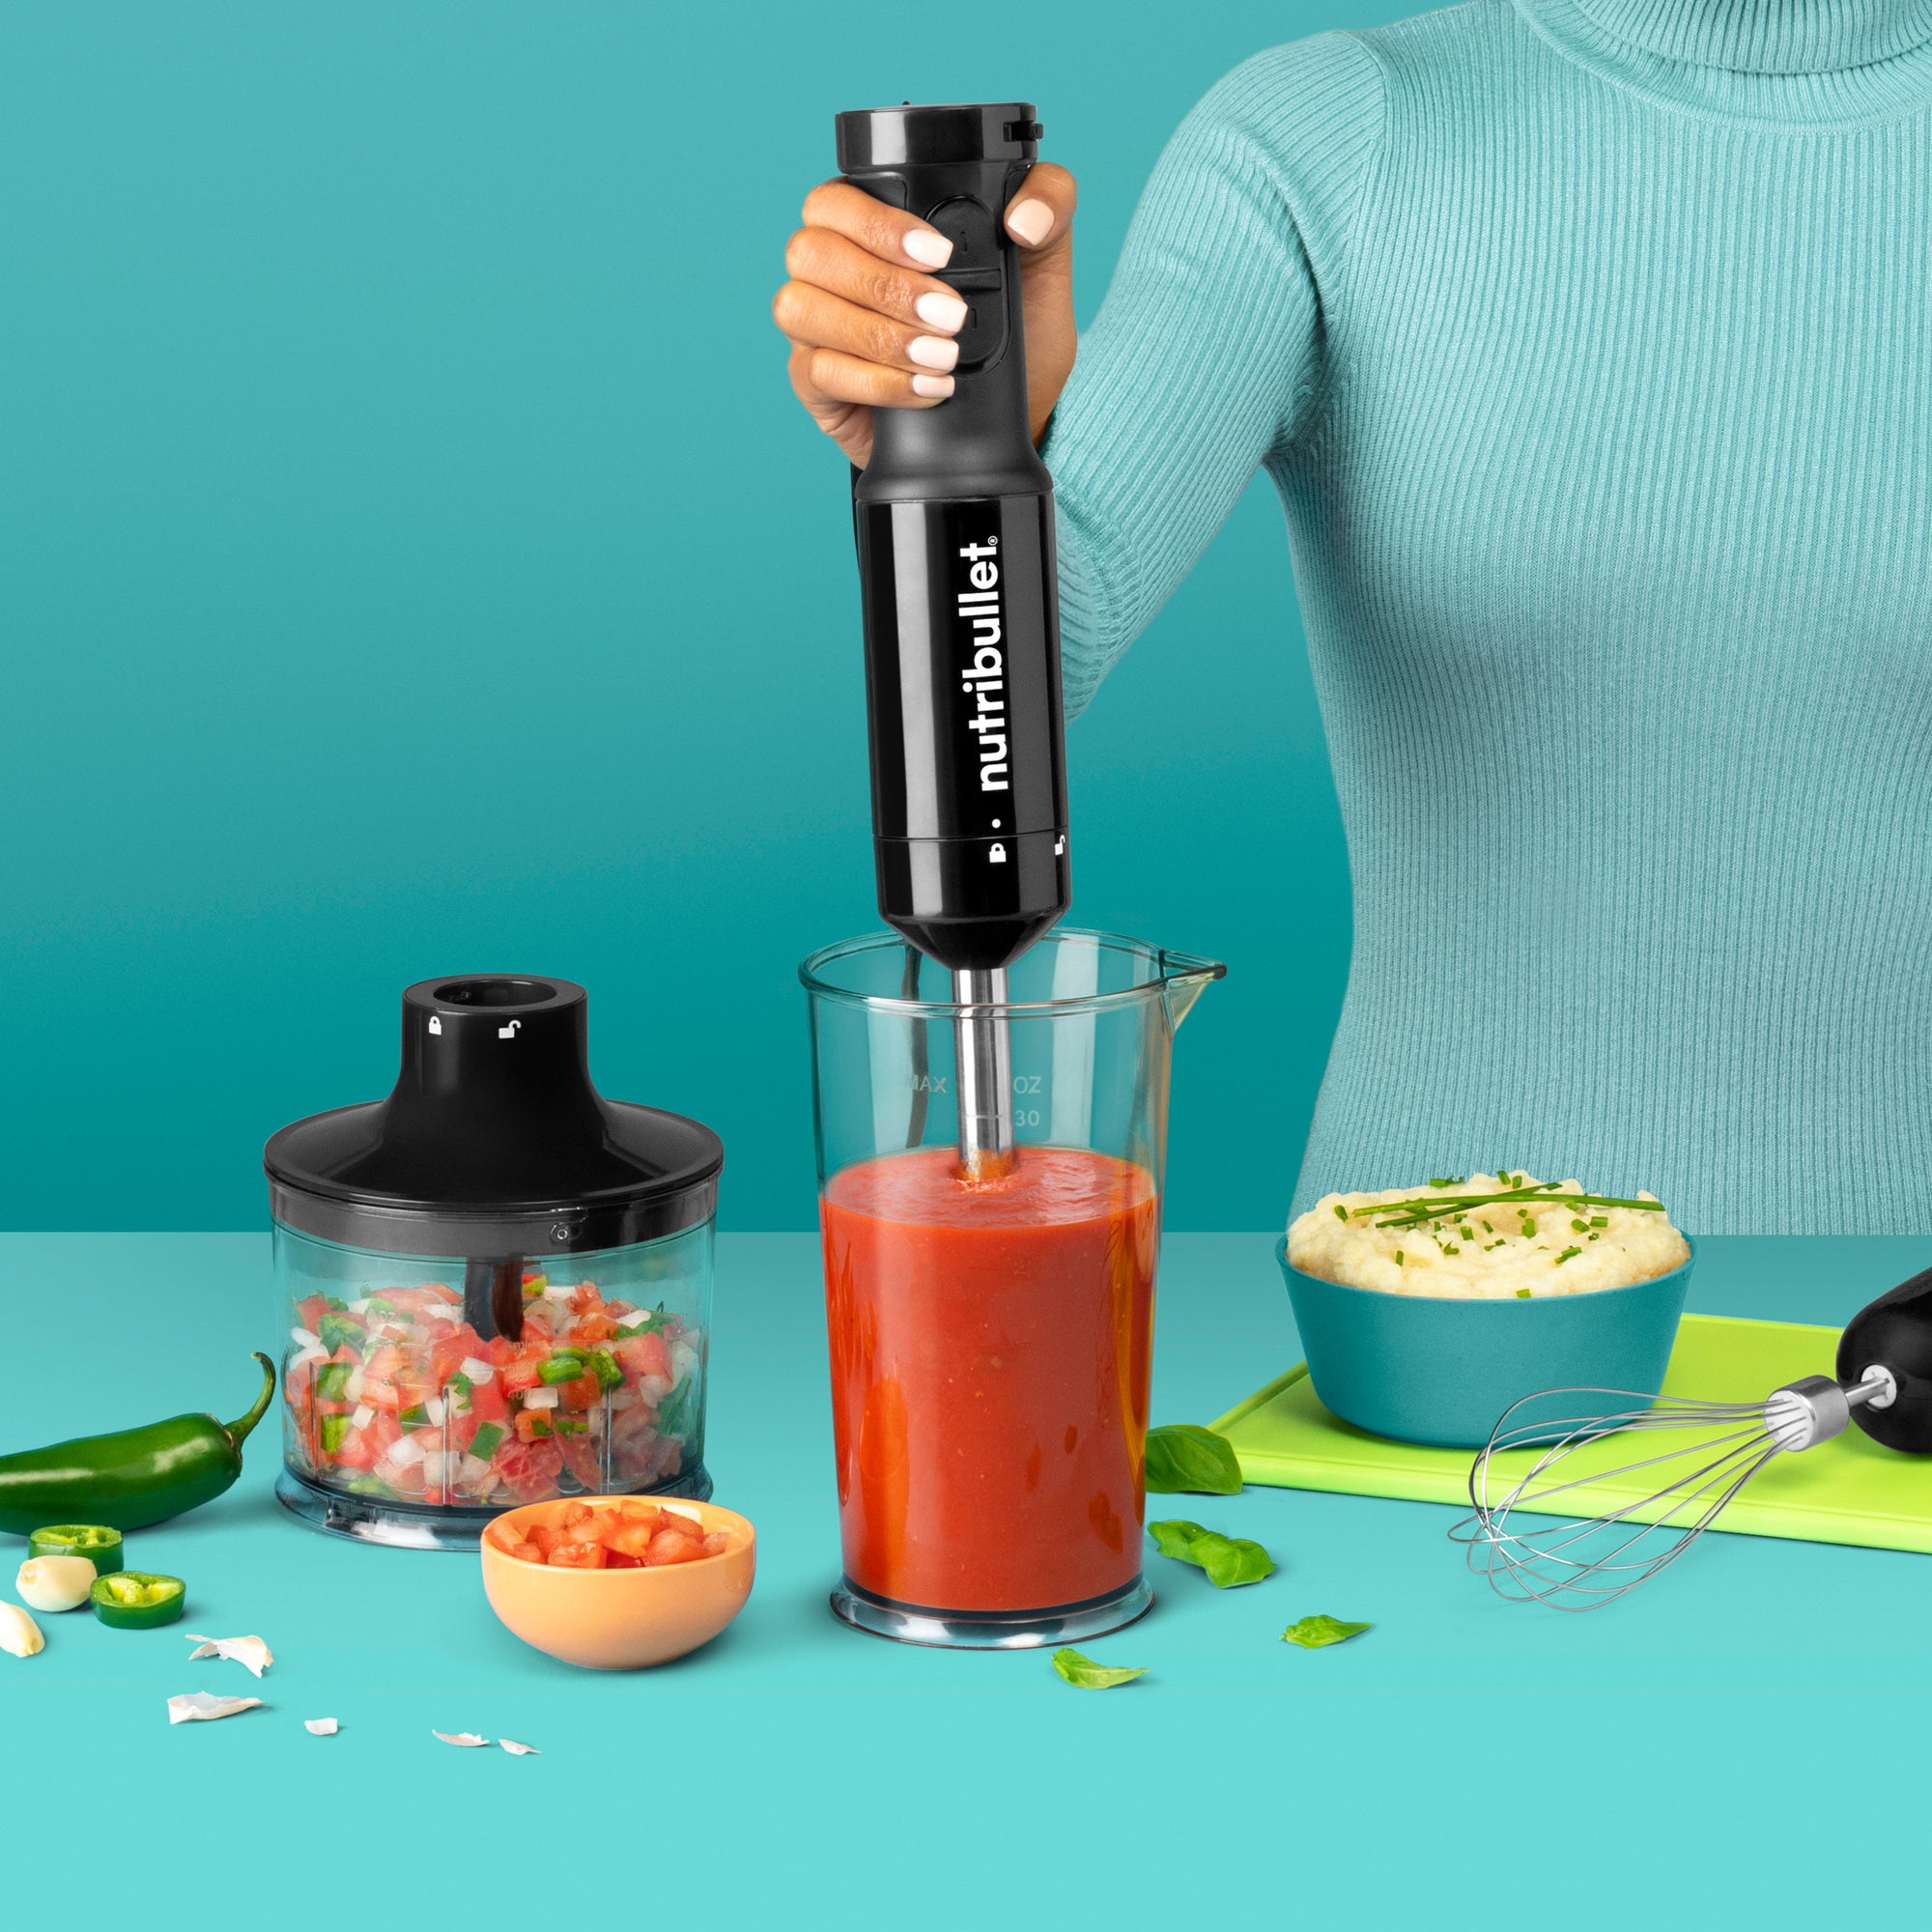 How To Chop Vegetables In A Nutribullet 